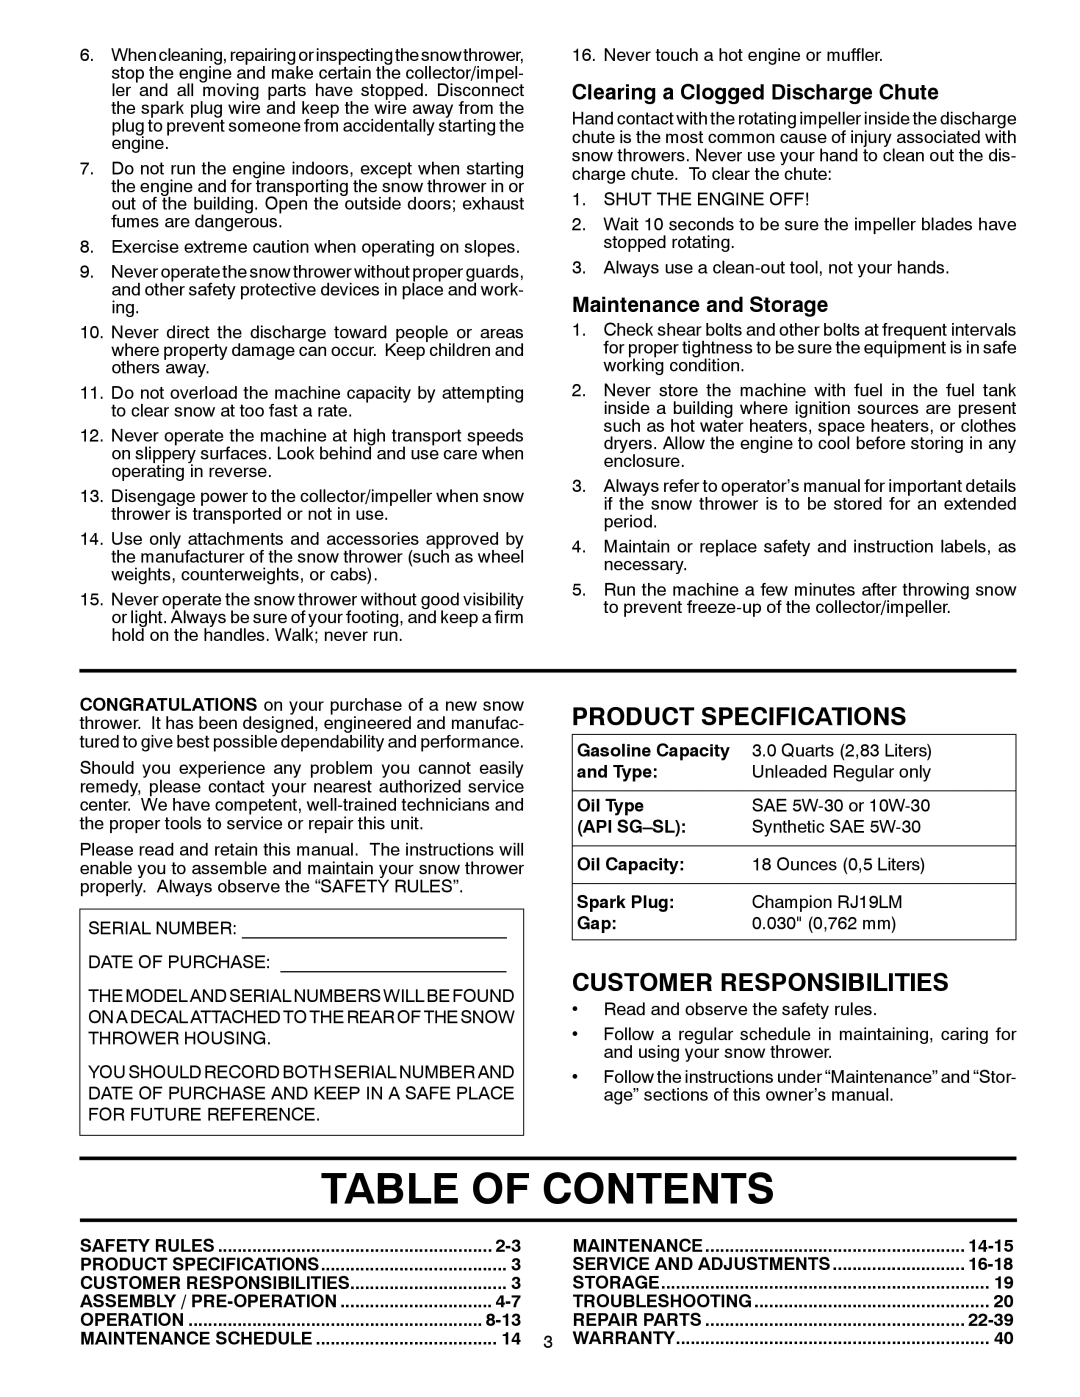 Poulan PR827ES Table Of Contents, Product Specifications, Customer Responsibilities, Clearing a Clogged Discharge Chute 